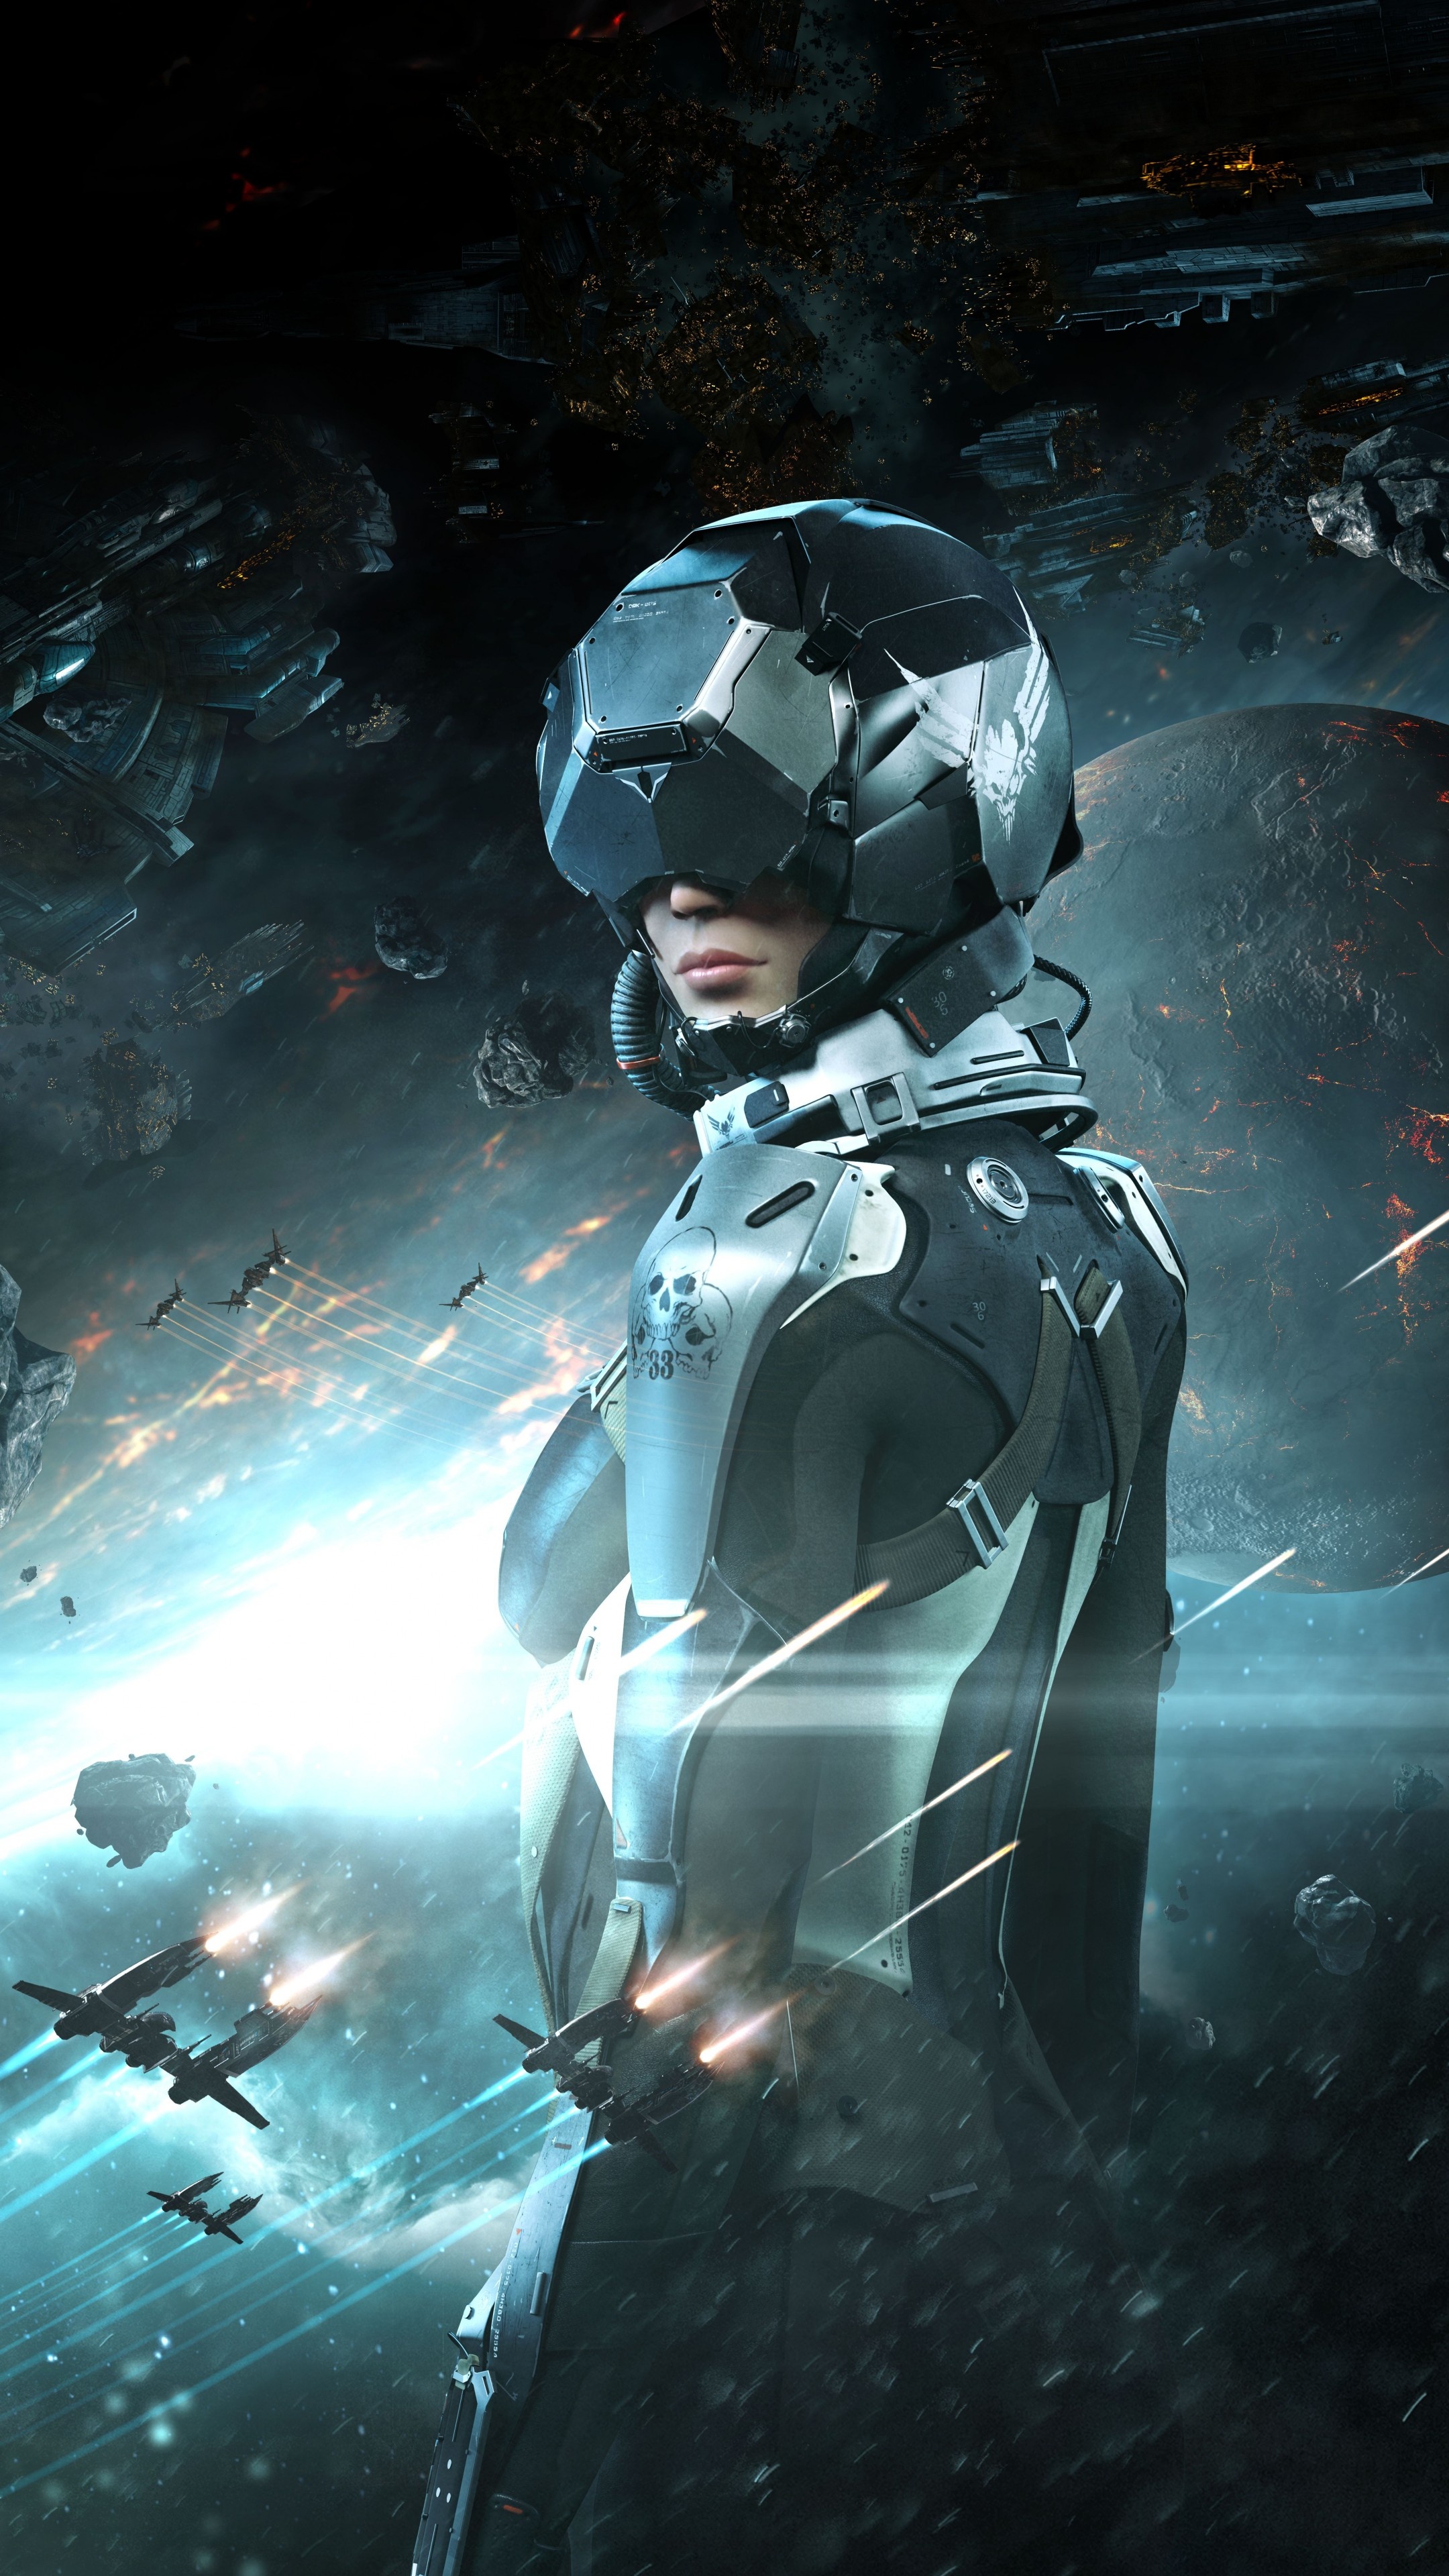 EVE Online, Valkyrie game, Space sci-fi, Best games, 2160x3840 4K Phone